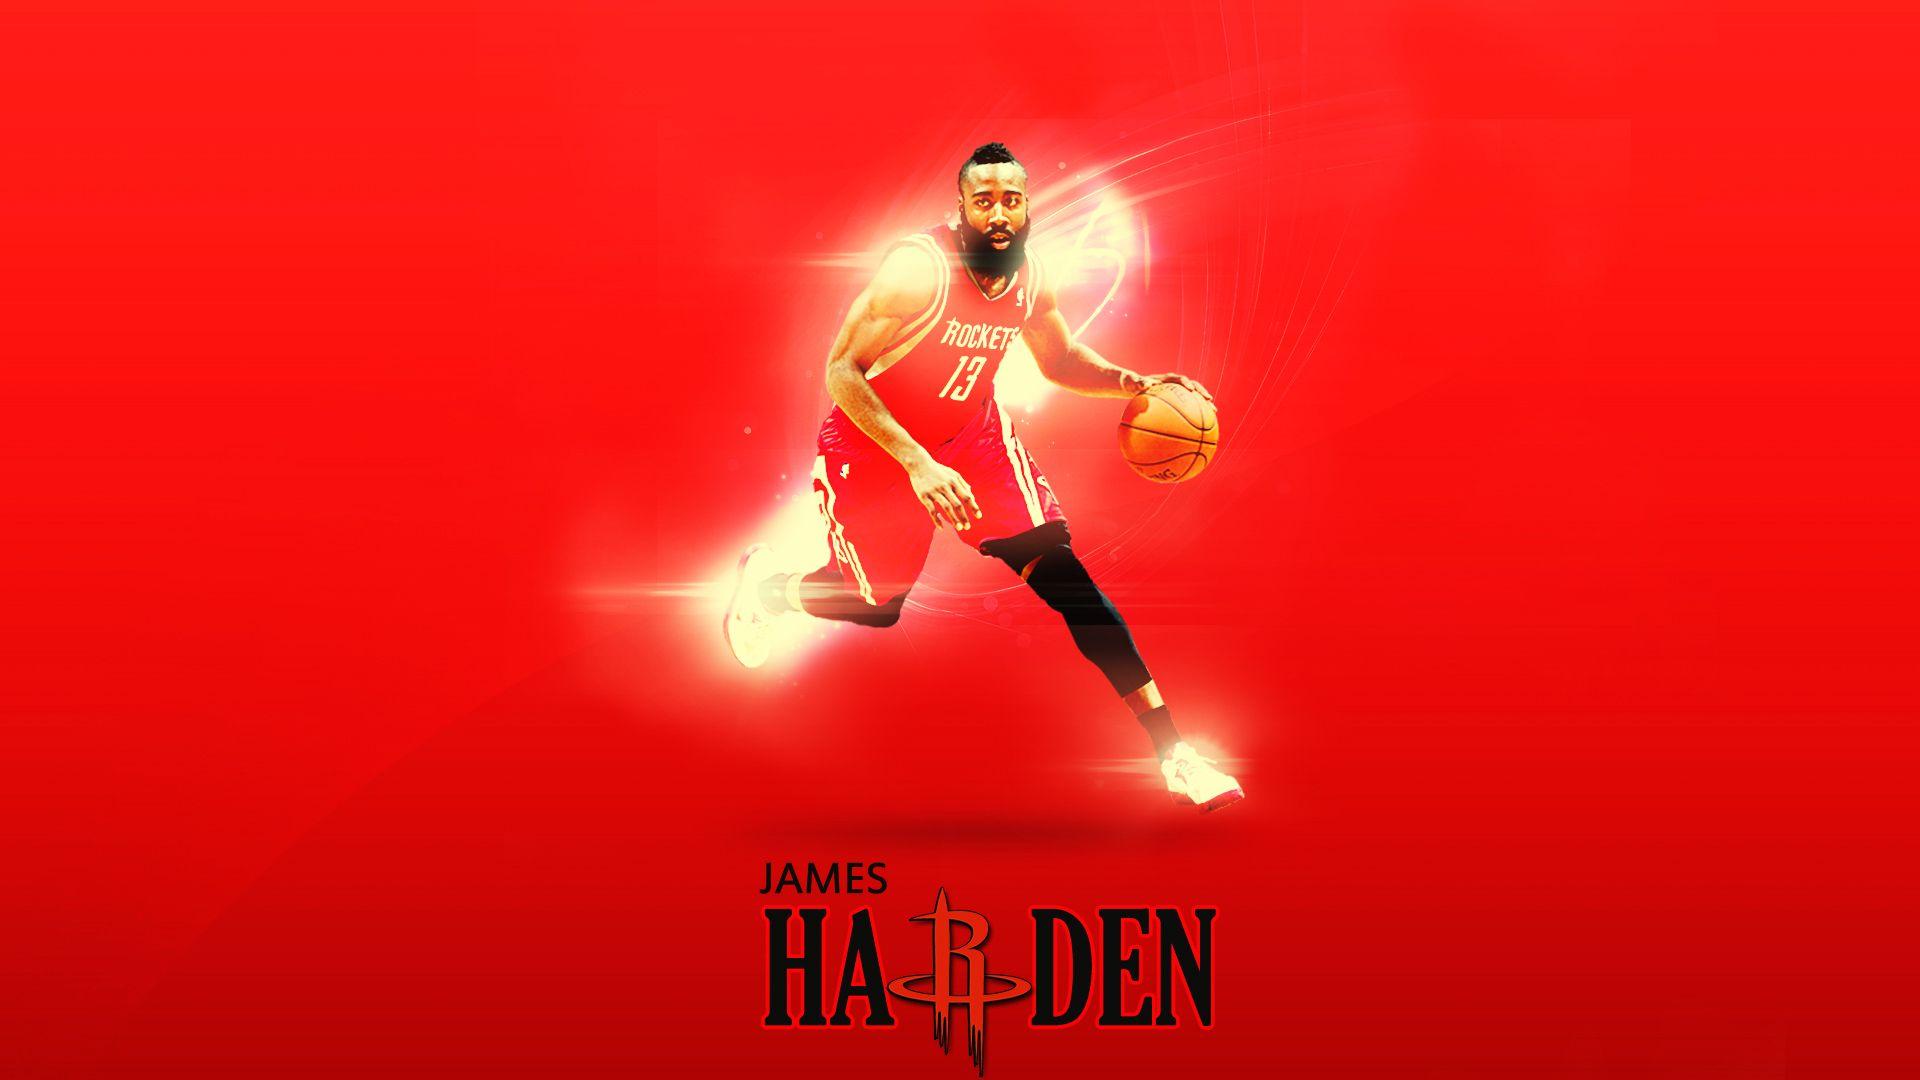 James Harden Full HD Wallpaper and Background Imagex1080